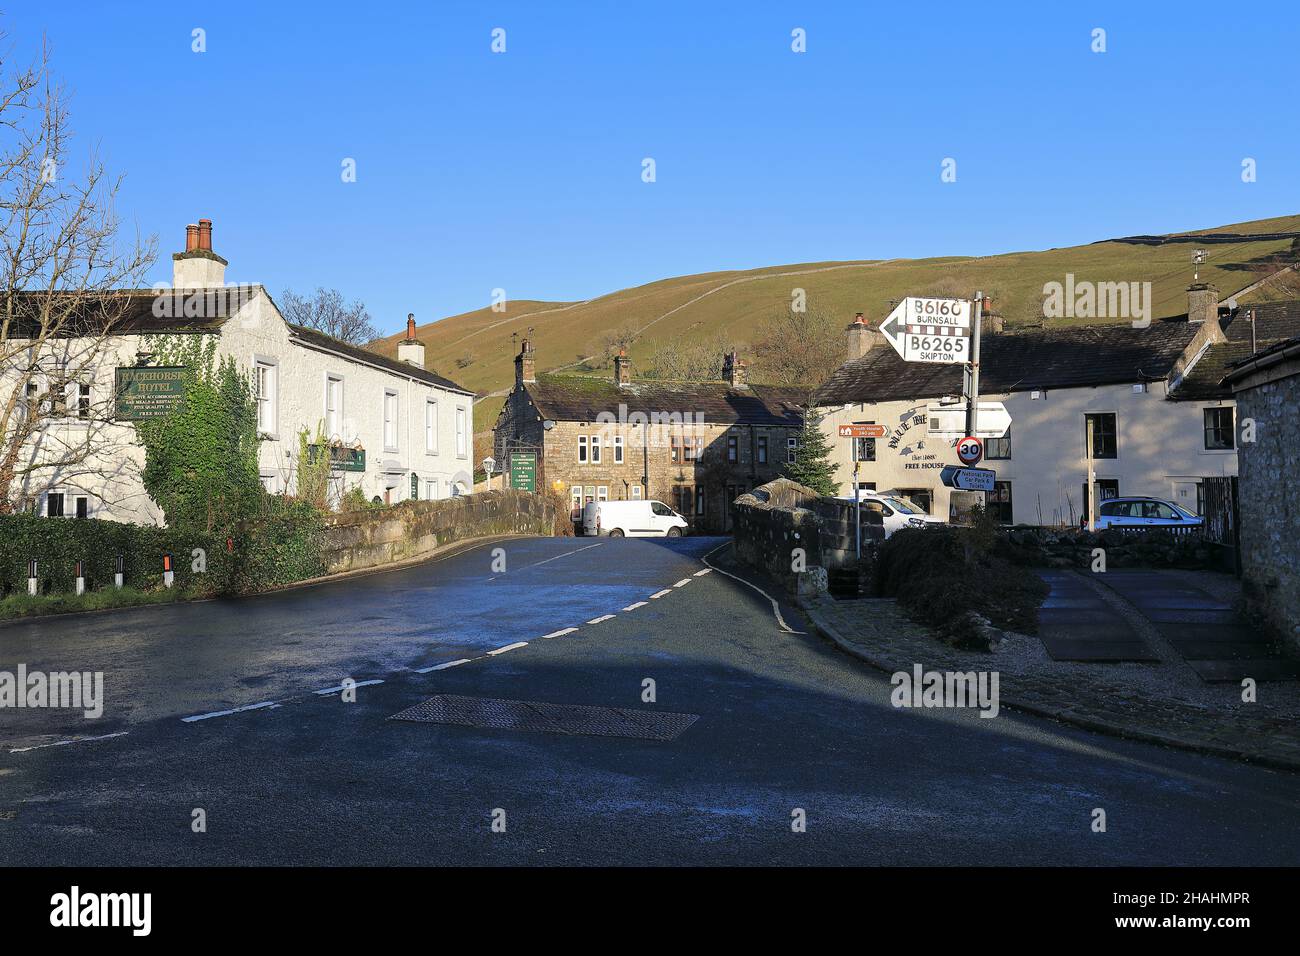 Homes and buildings in the village of Kettlewell, Upper-Warfedale, Yorkshire Dales, including the Racehorses Hotel and Blue Bell Inn Stock Photo